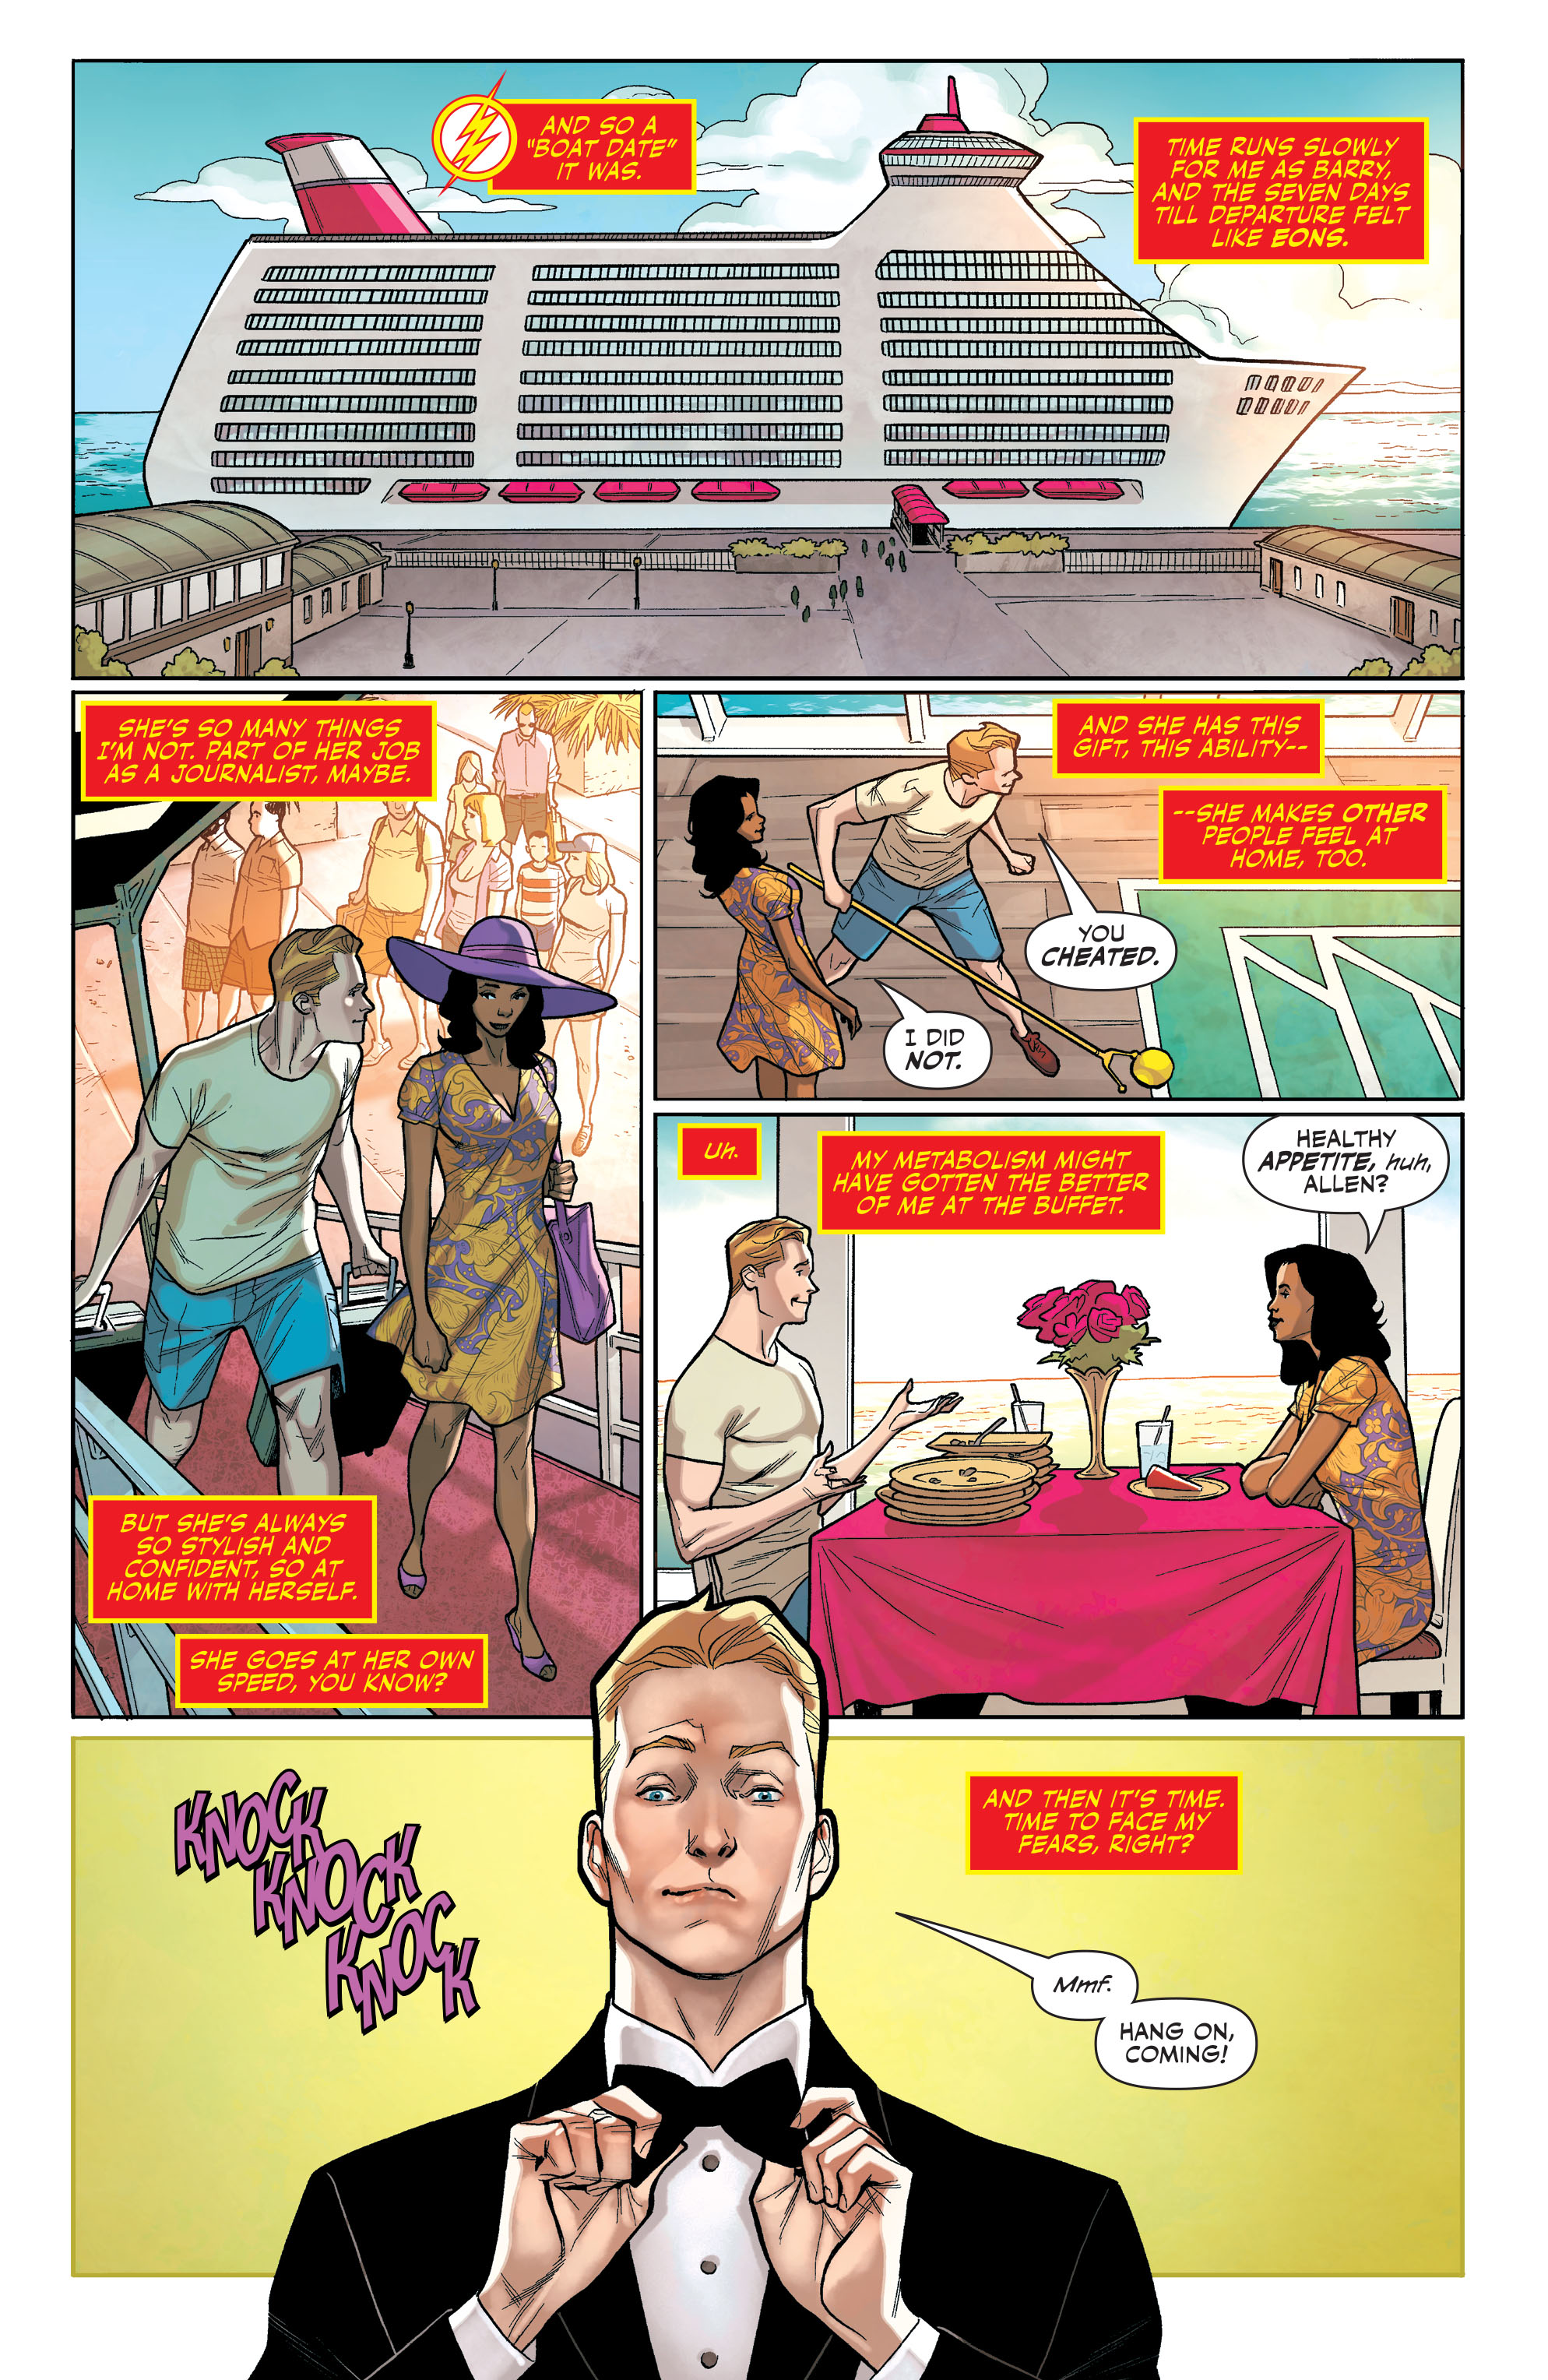 The Flash: Fastest Man Alive (2020-): Chapter 1 - Page 5